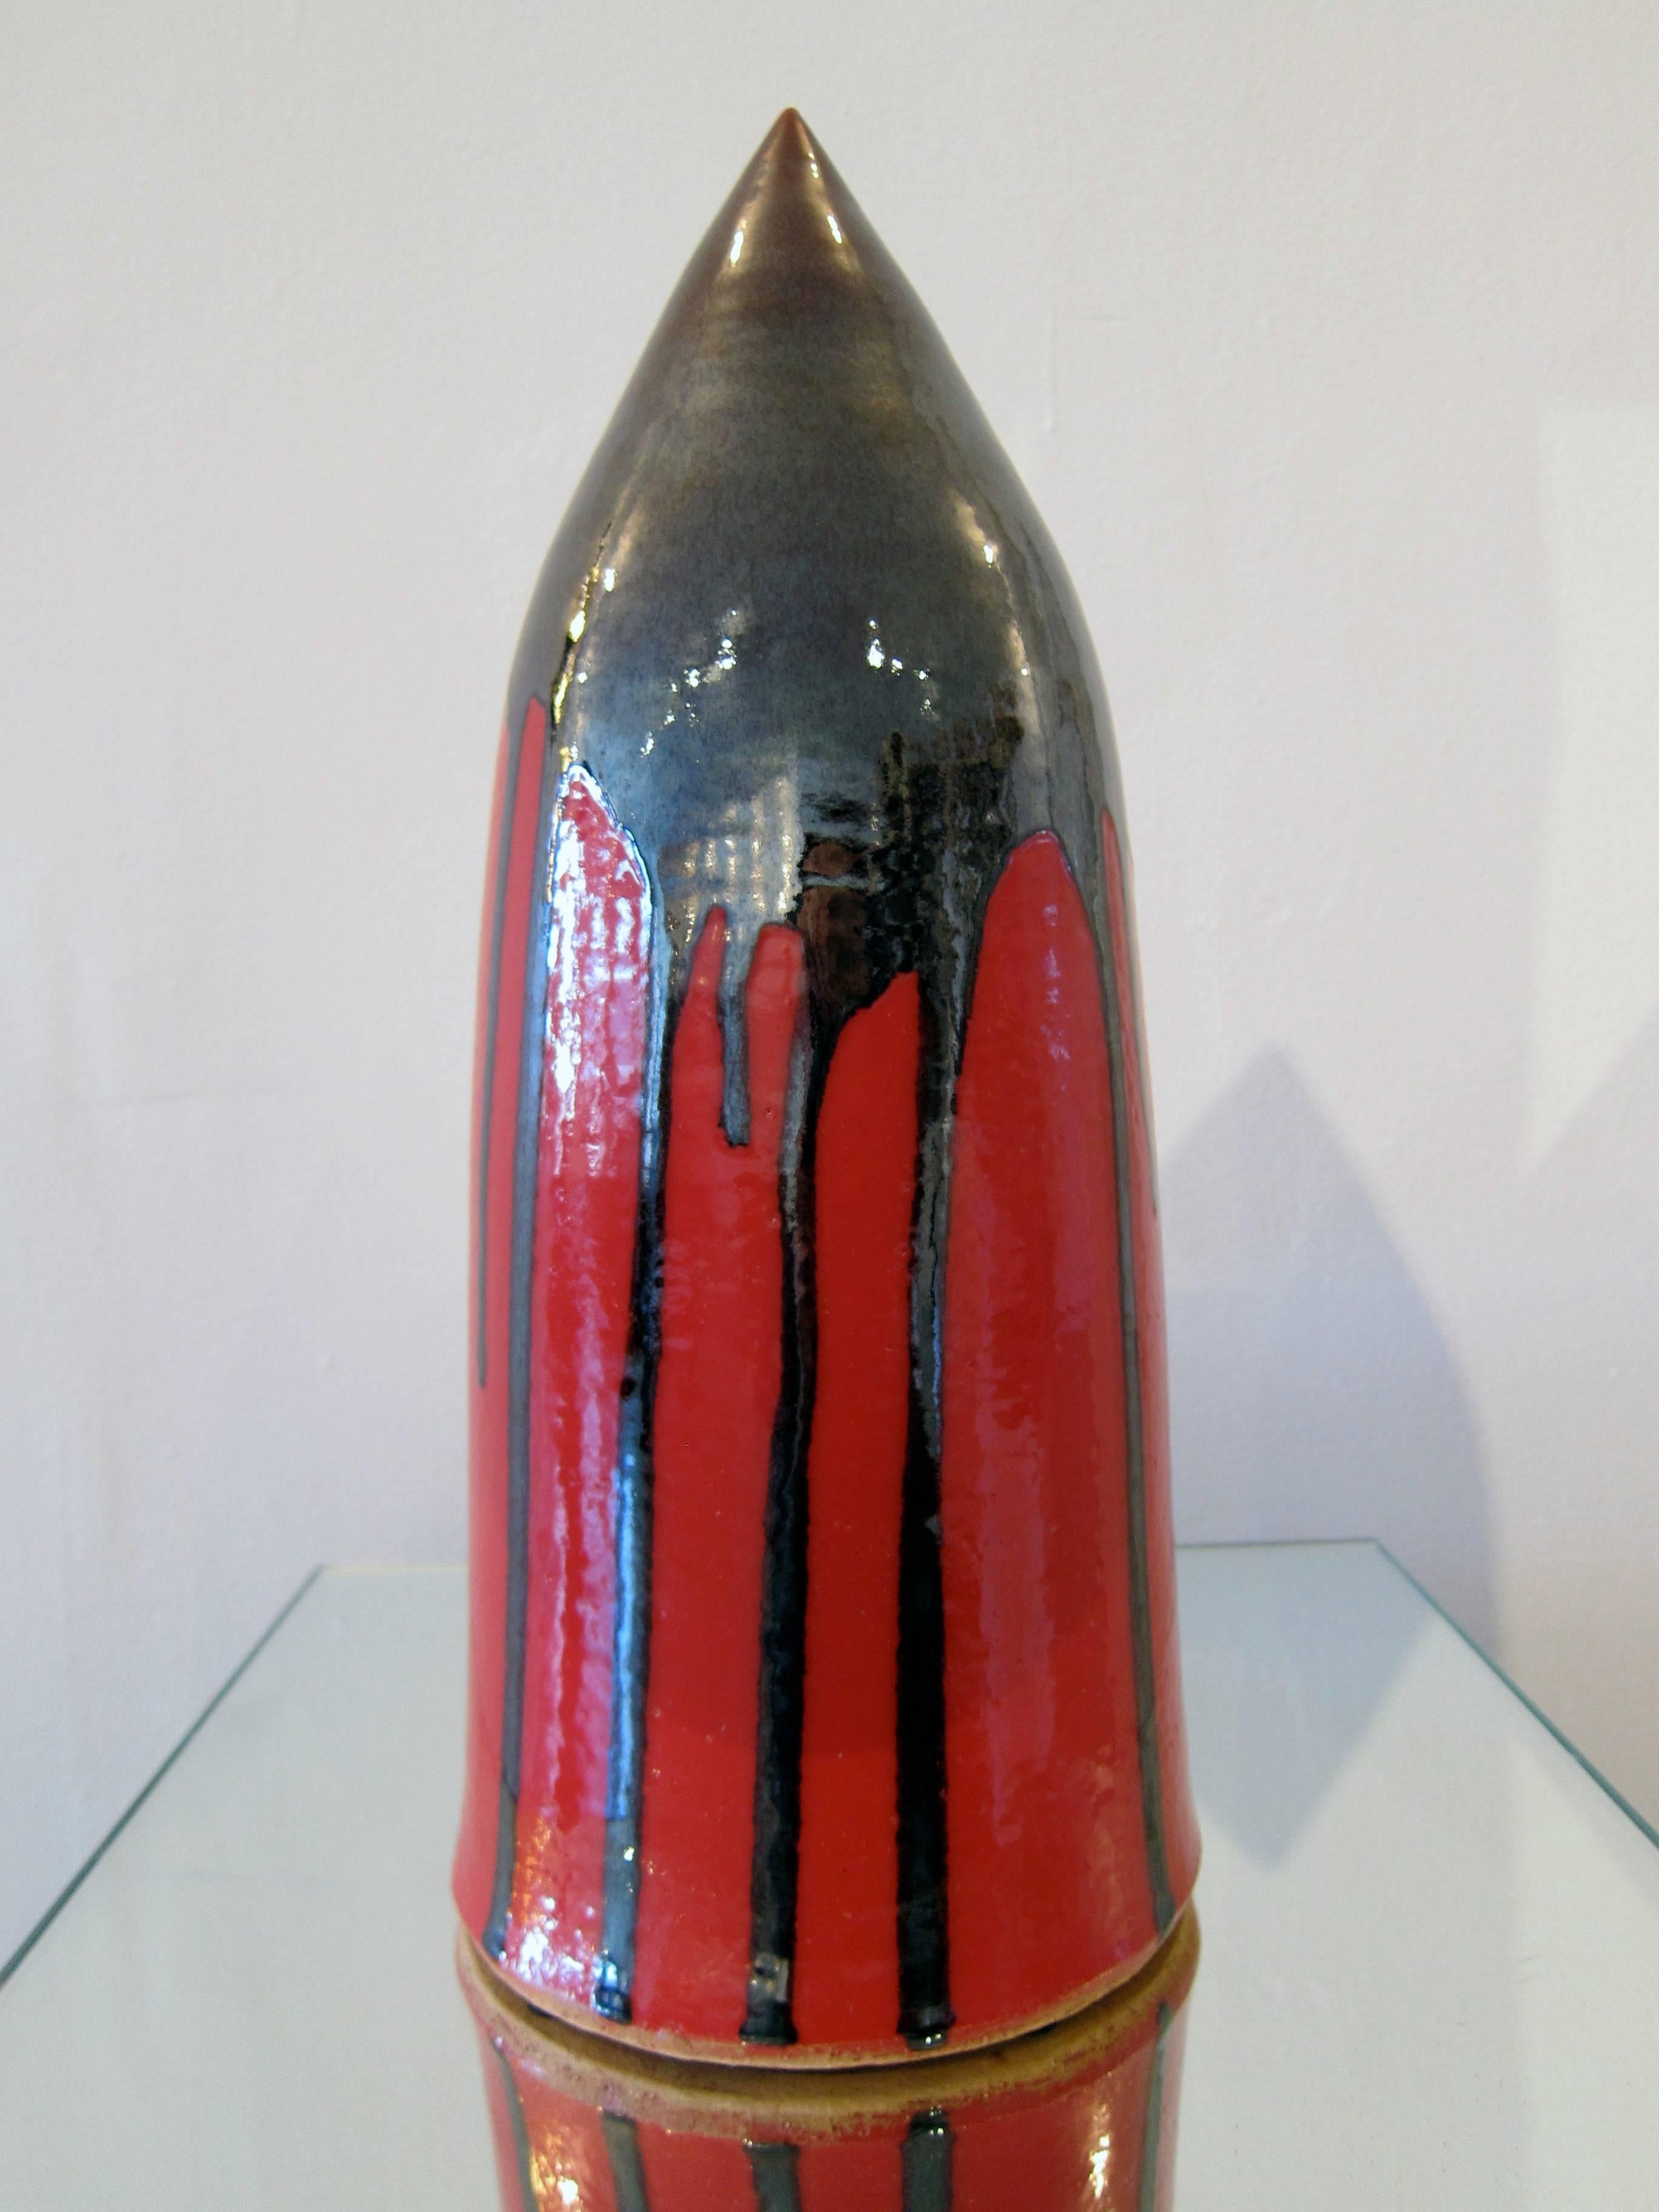 This red and black sculpture made of high fire stoneware and glaze from 2013 is the work of sculptor James Salaiz.

James Salaiz is a sculptor and ceramicist based in New York City. His first experience with clay was as a young child in San Antonio,